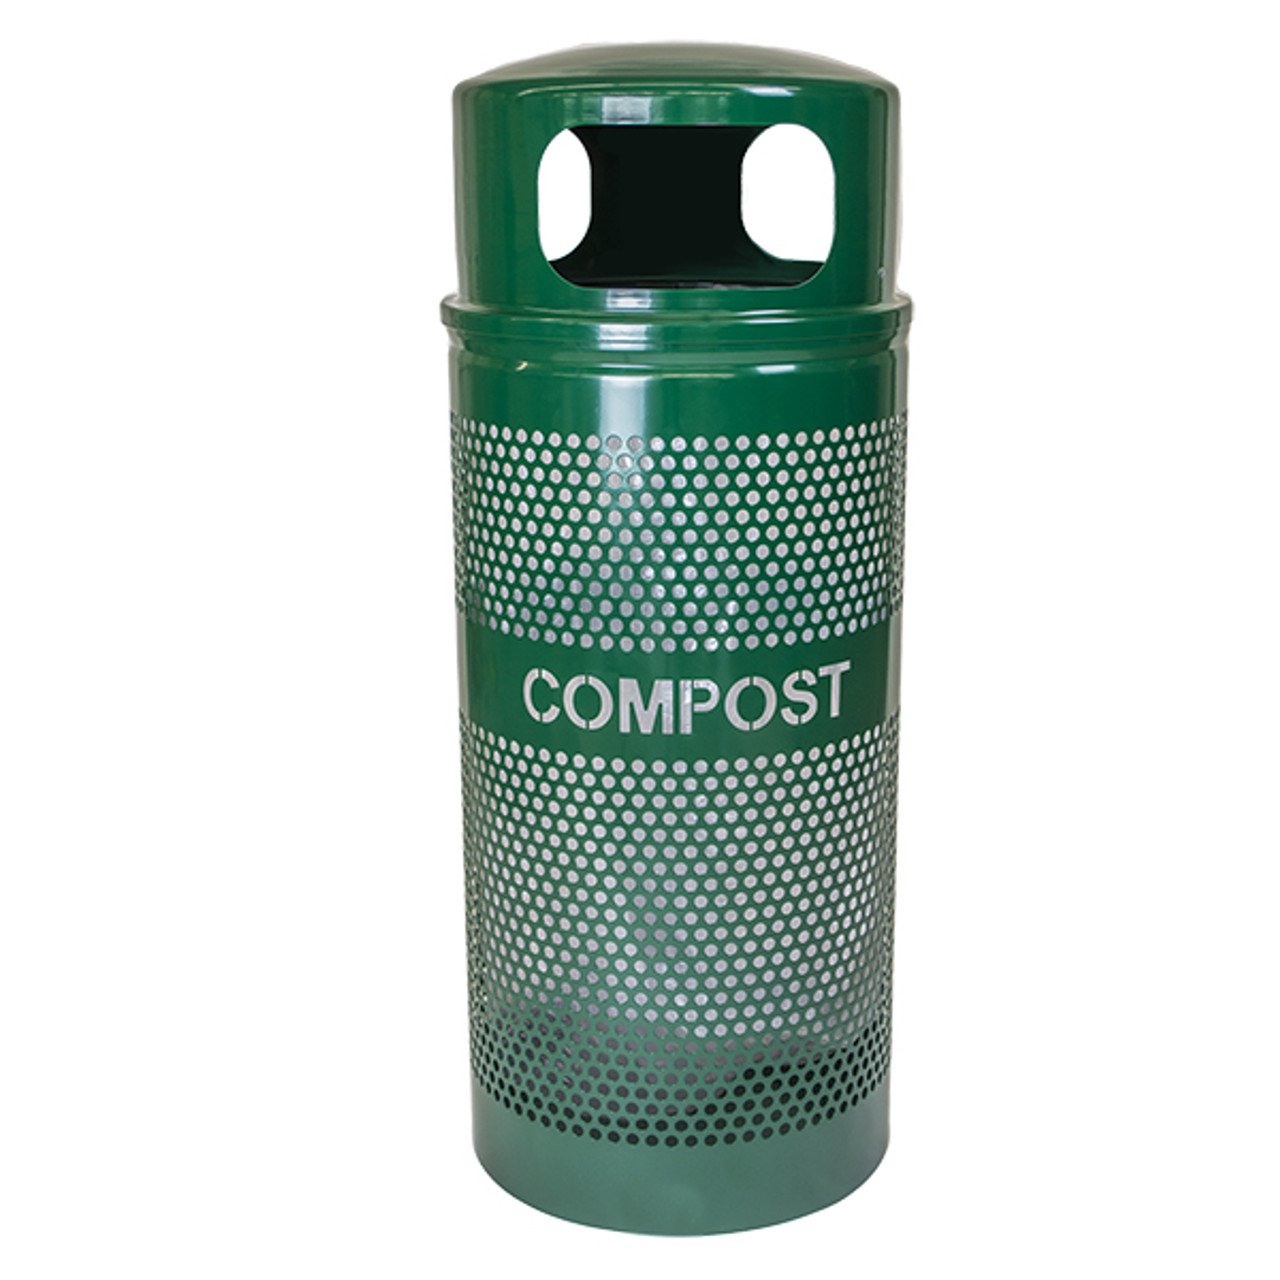 34 Gallon Mesh Compost Can with Dome Top WR-34R DM COMPOST HGR with Anchor Kit